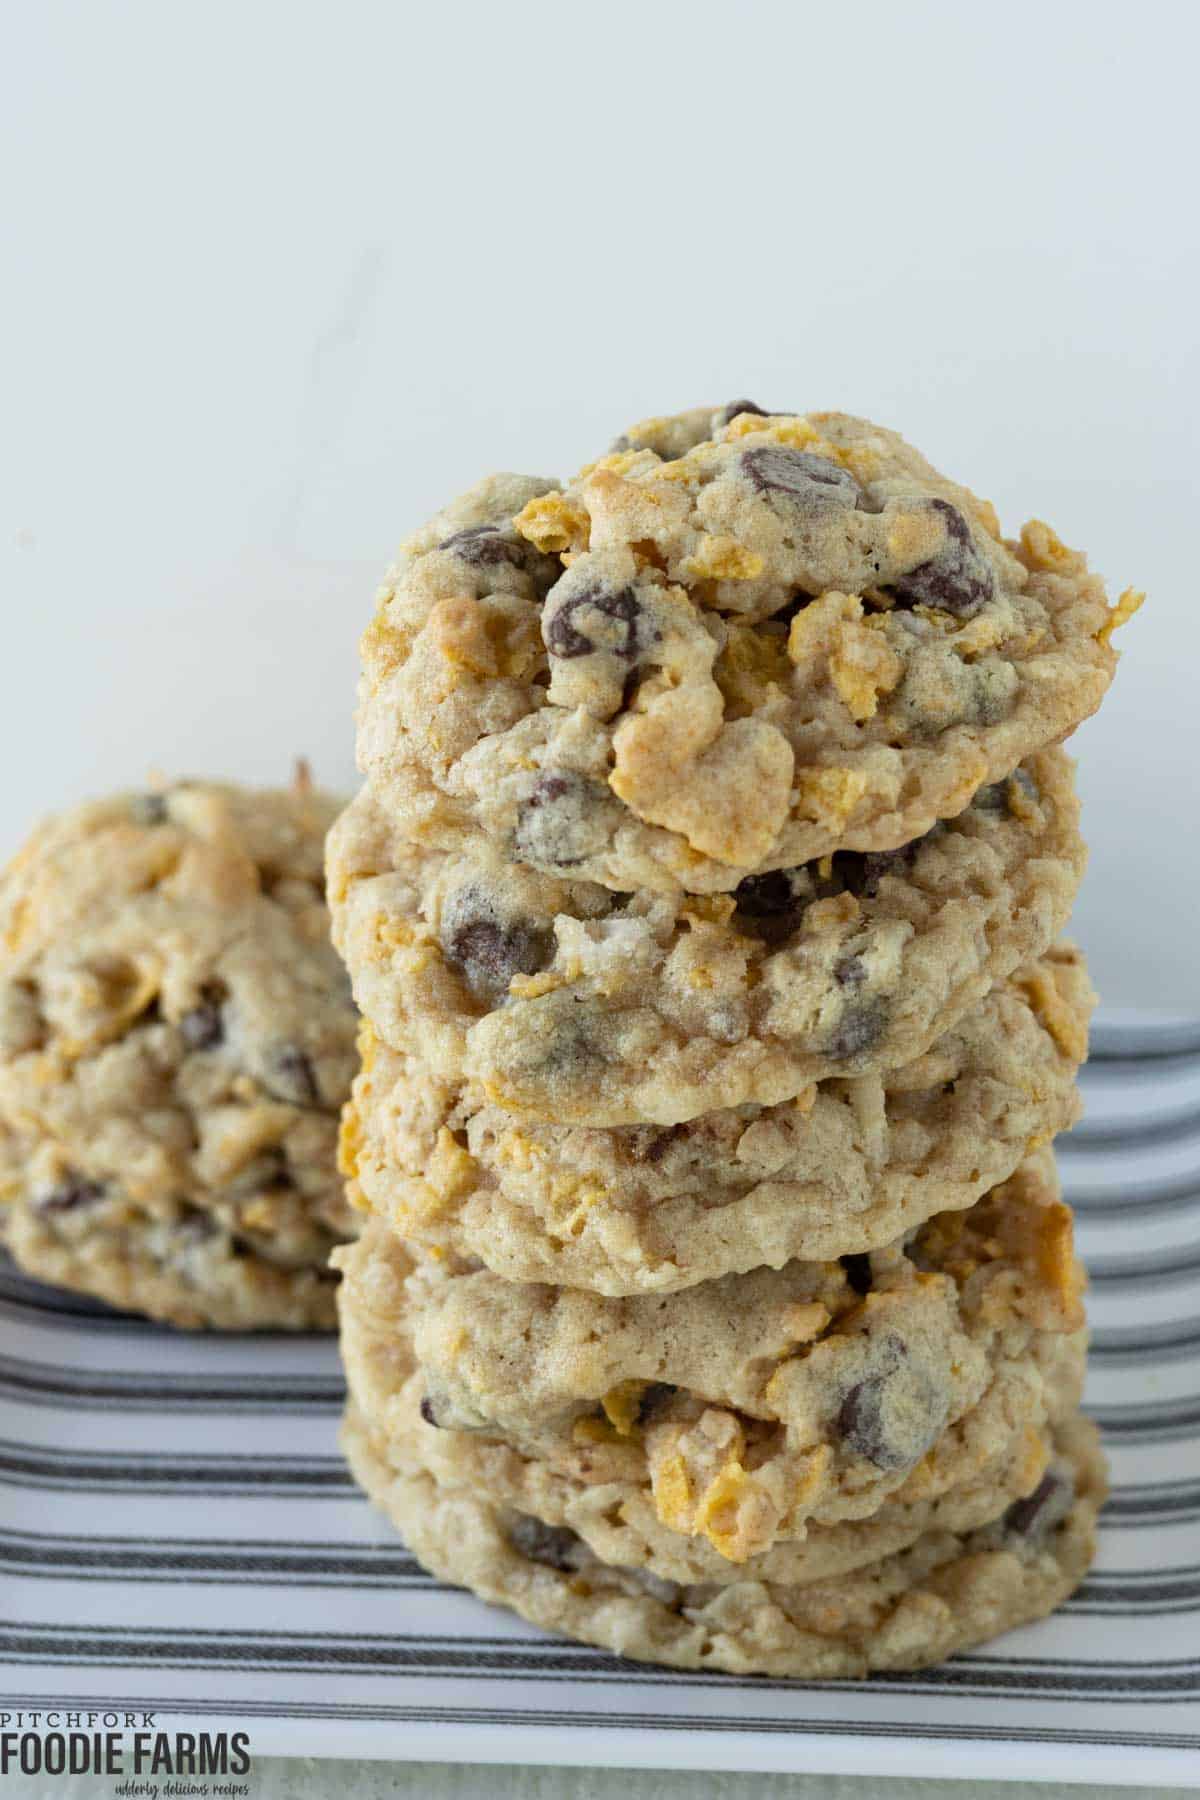 Coconut ranger cookies with corn flakes and chocolate chips.